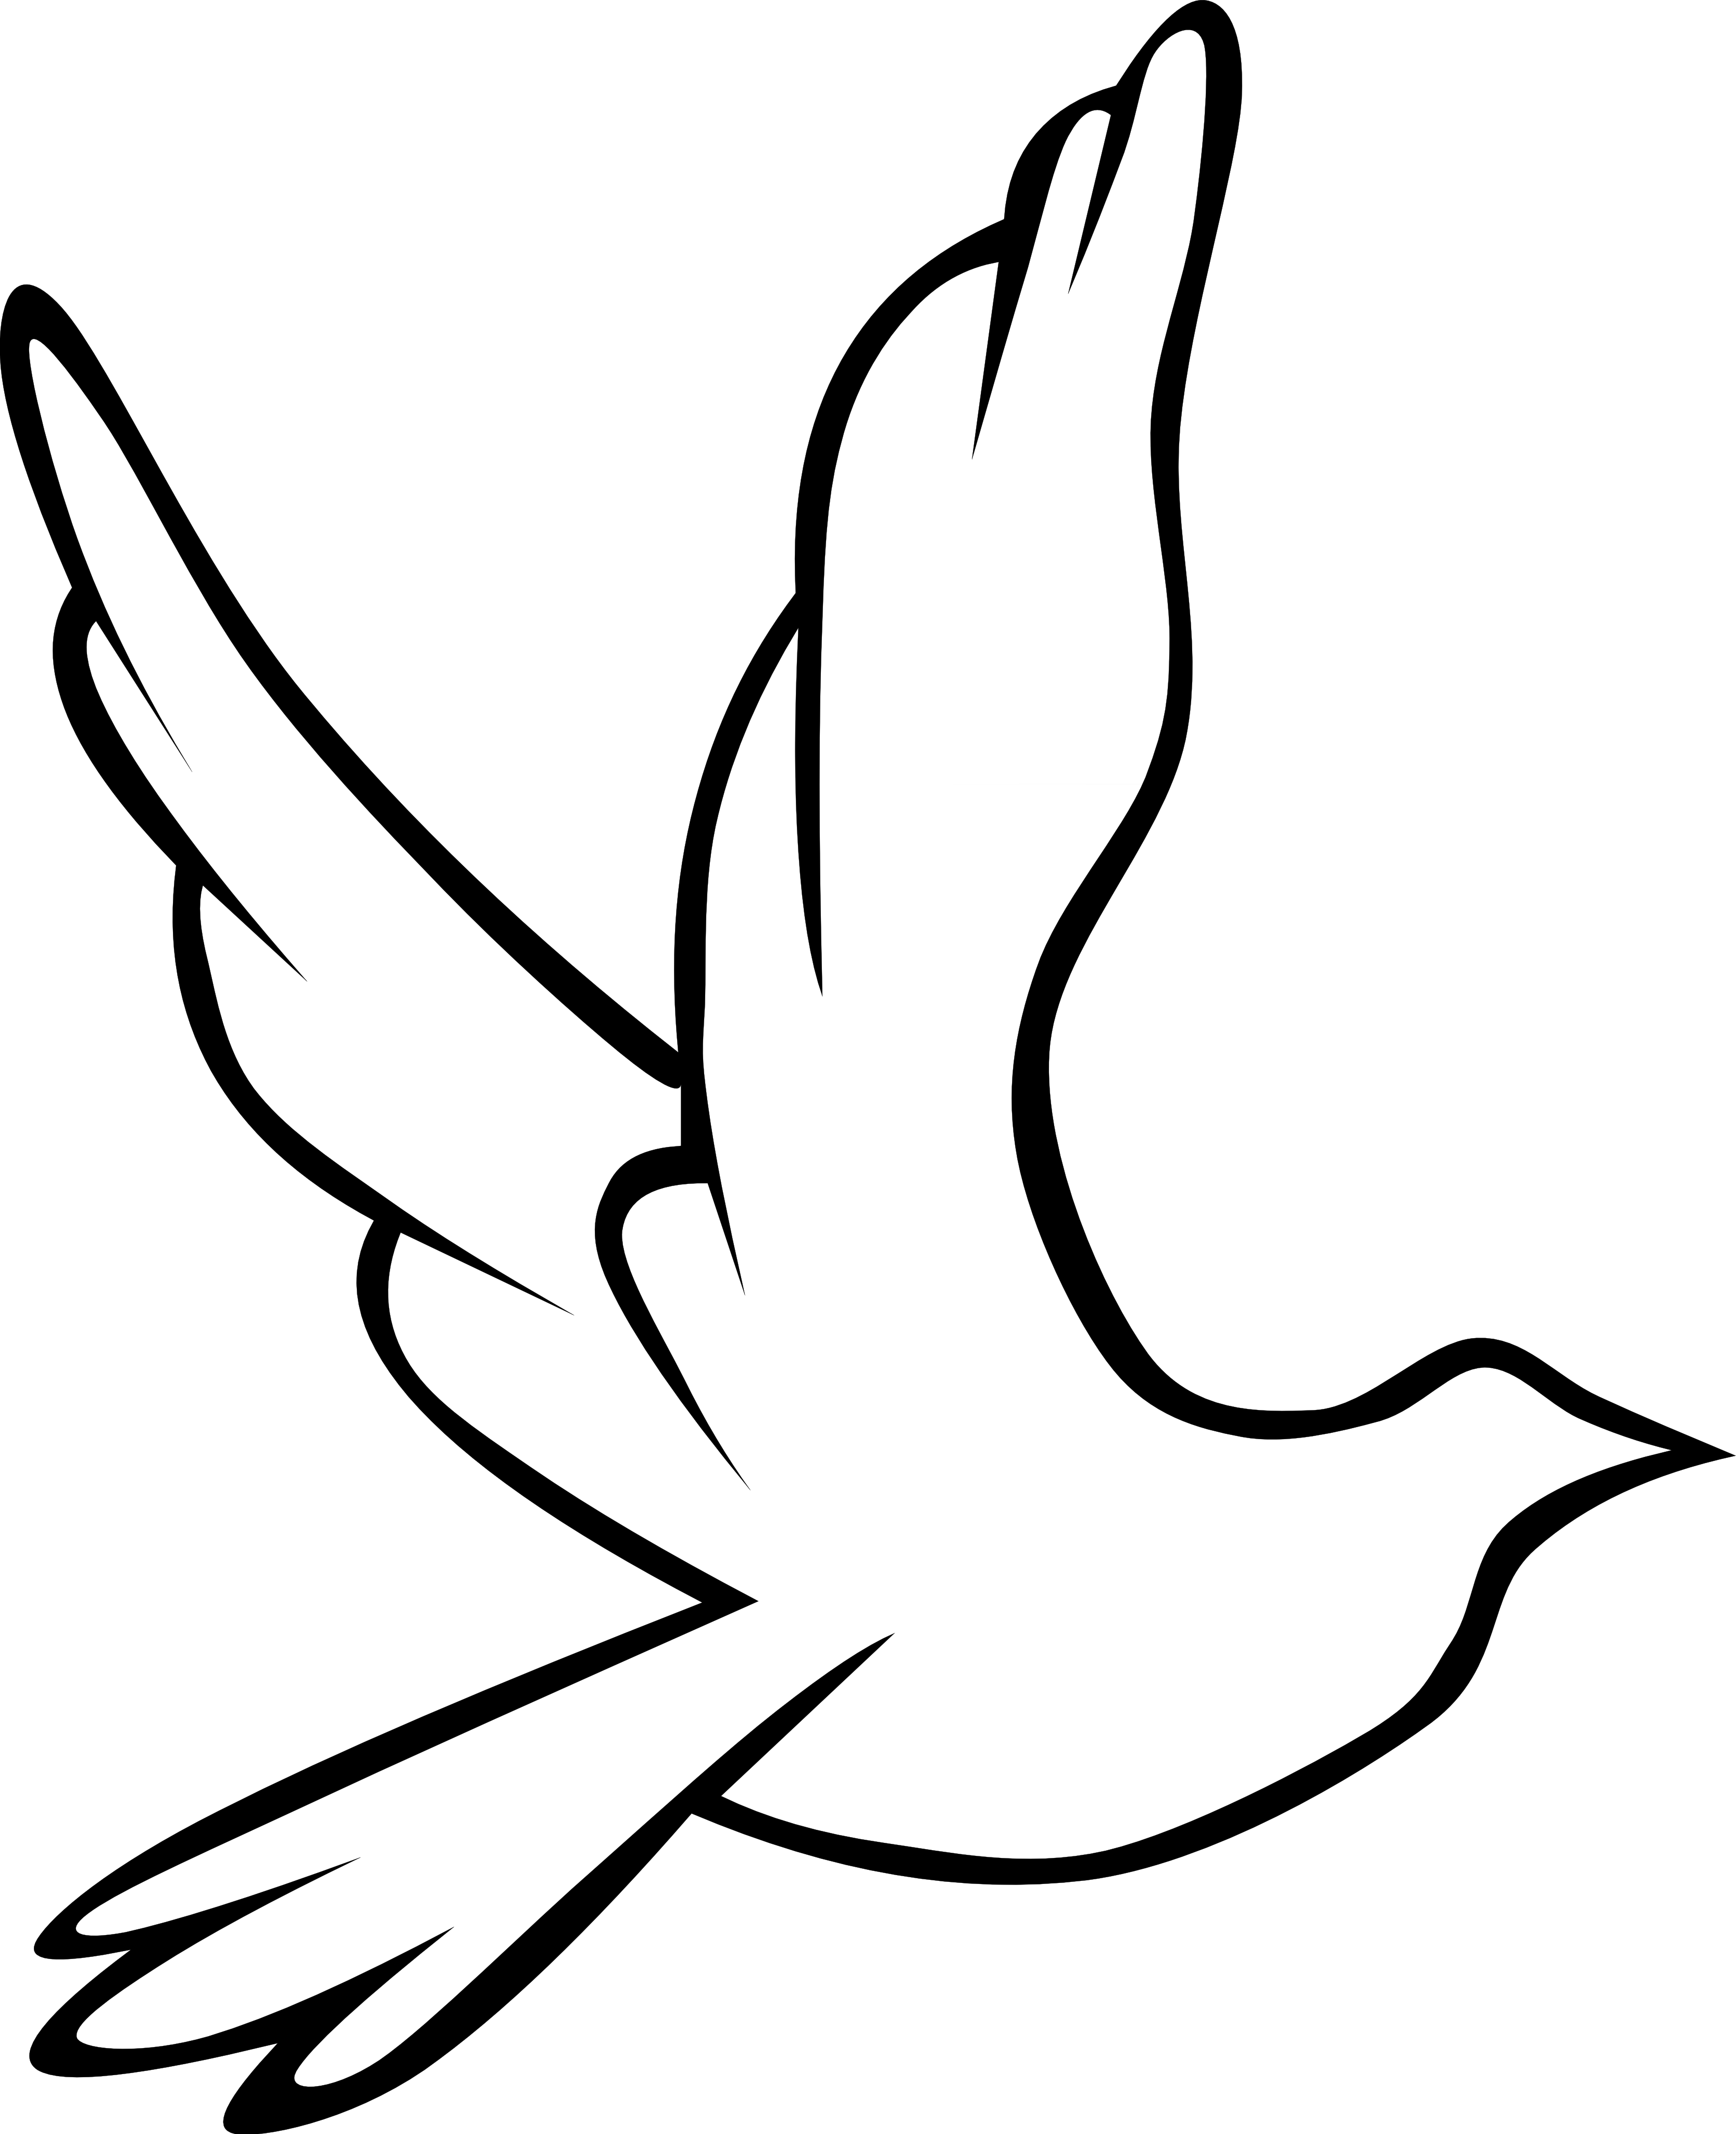 For - Doves Flying Clipart - Free Clipart Images